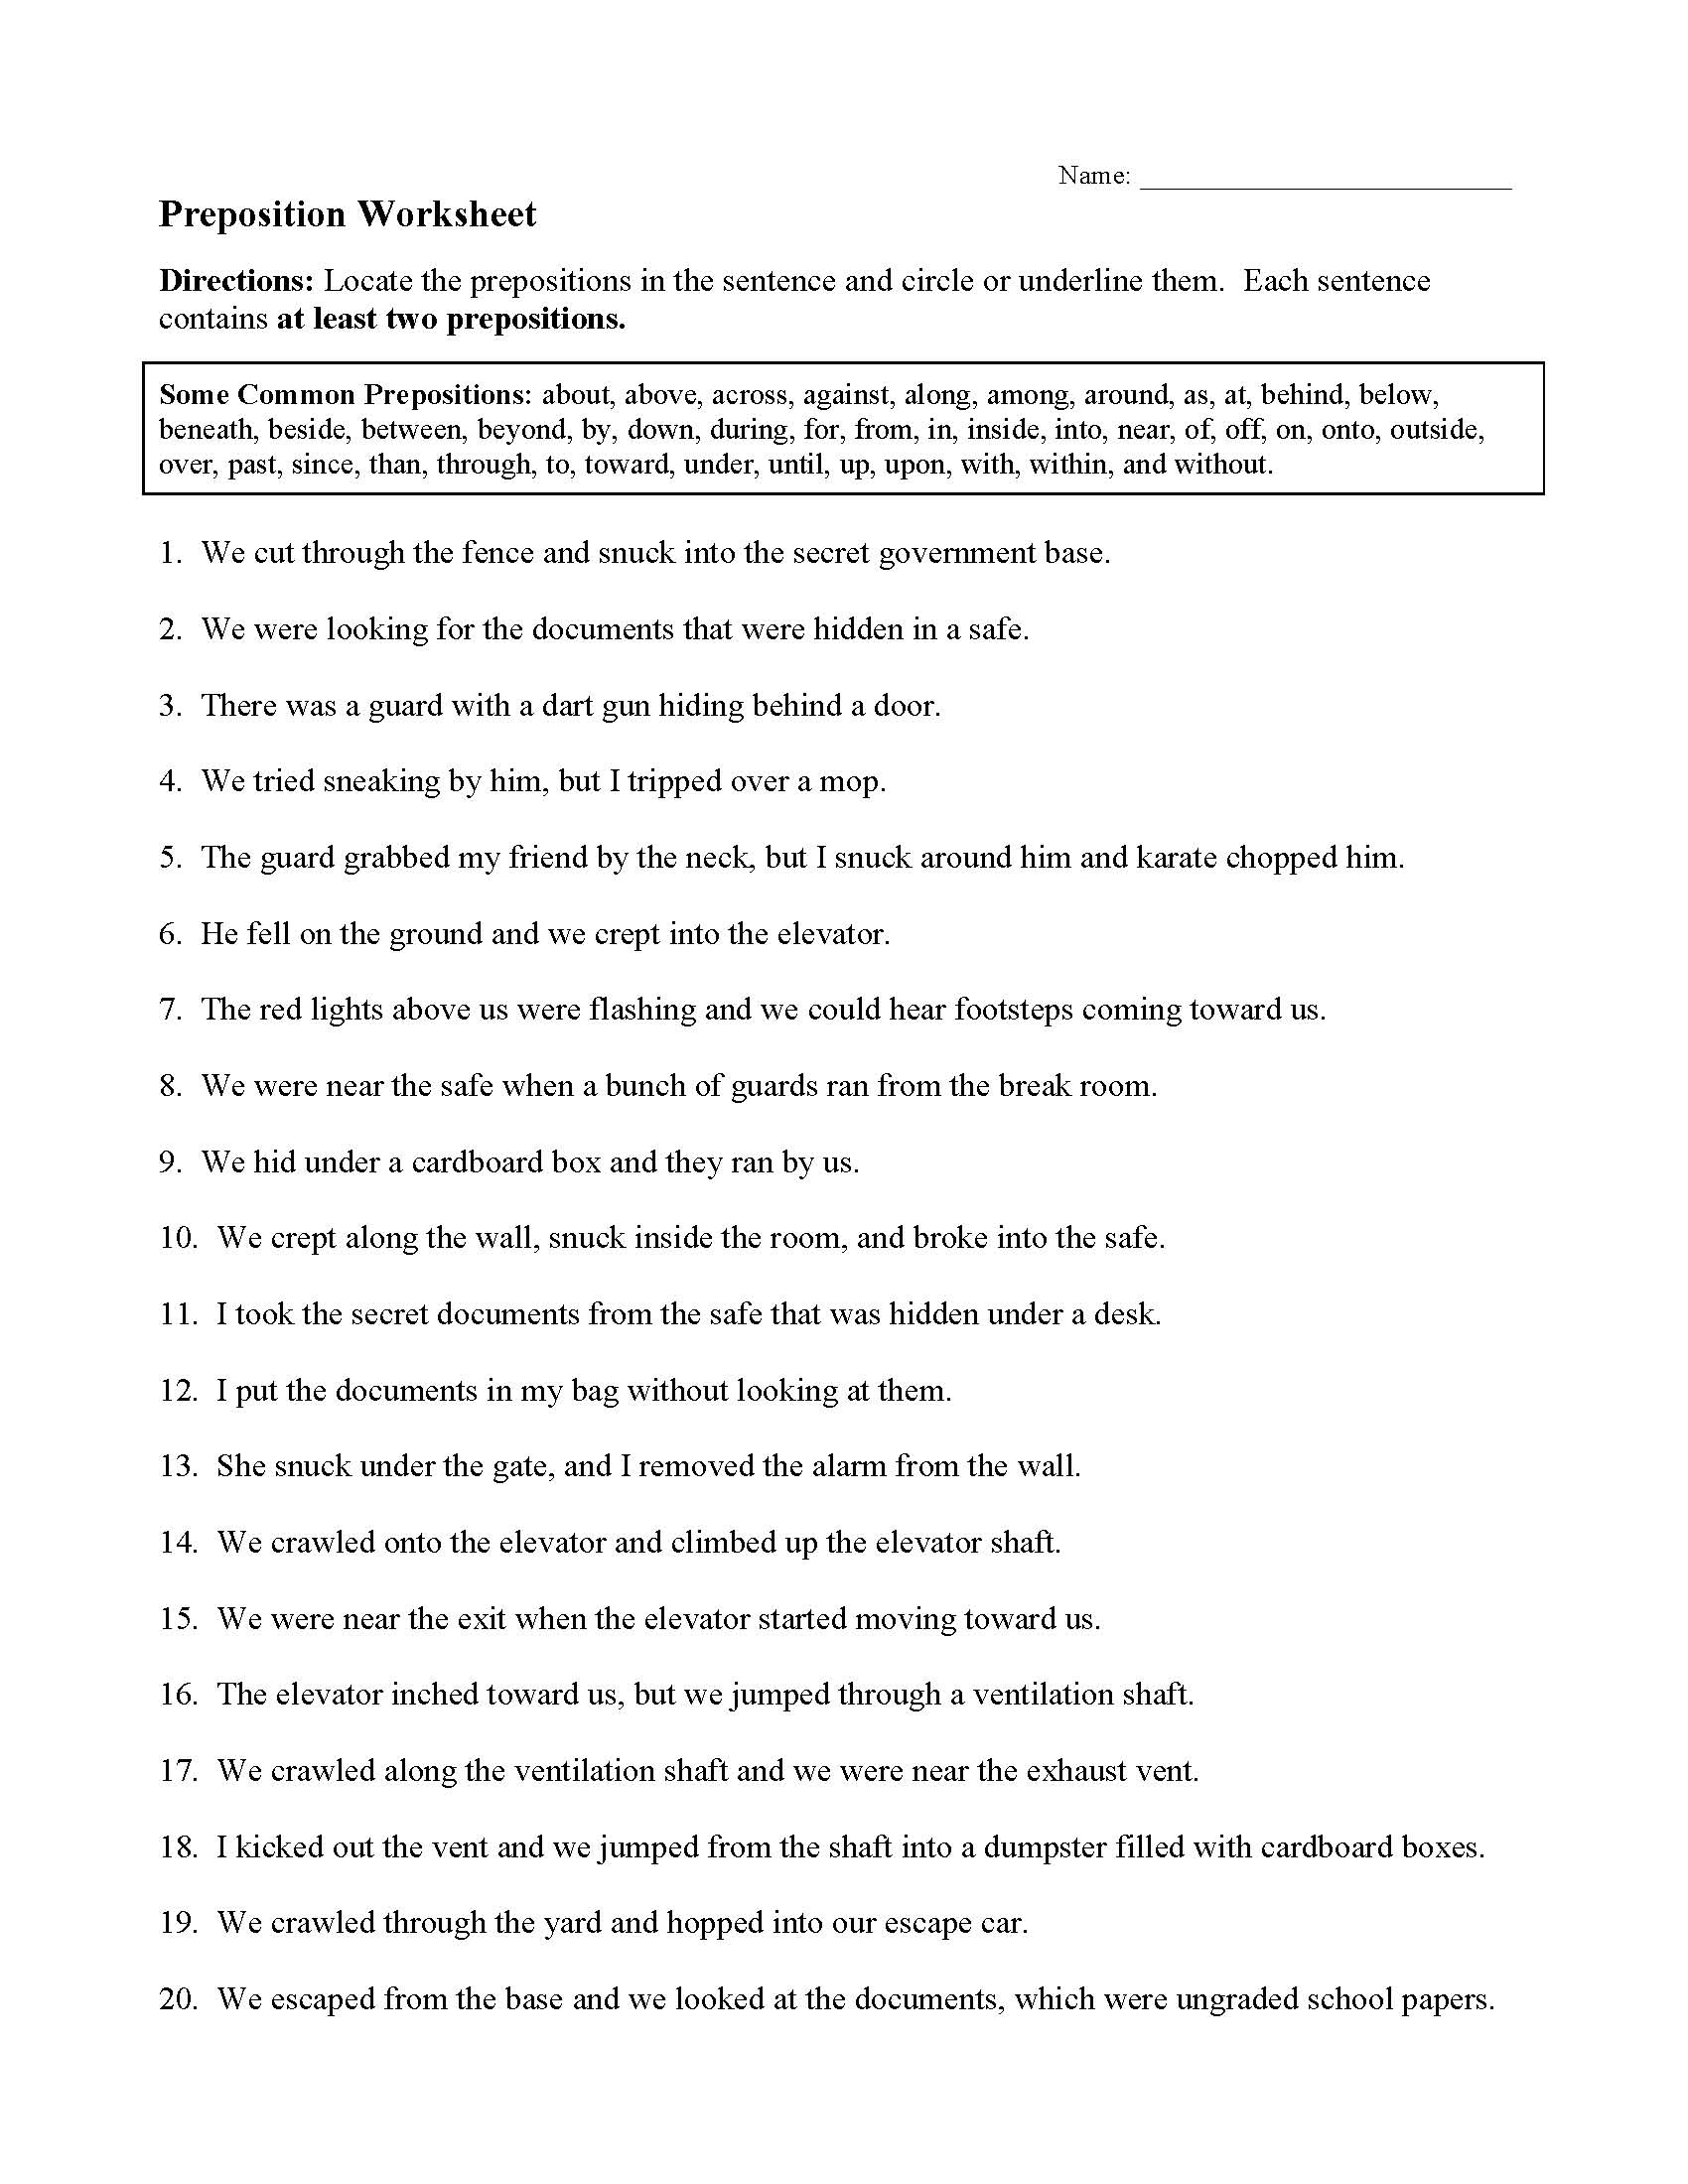 This is a preview image of Prepositions Worksheet | Secret Mission. Click on it to enlarge it or view the source file.